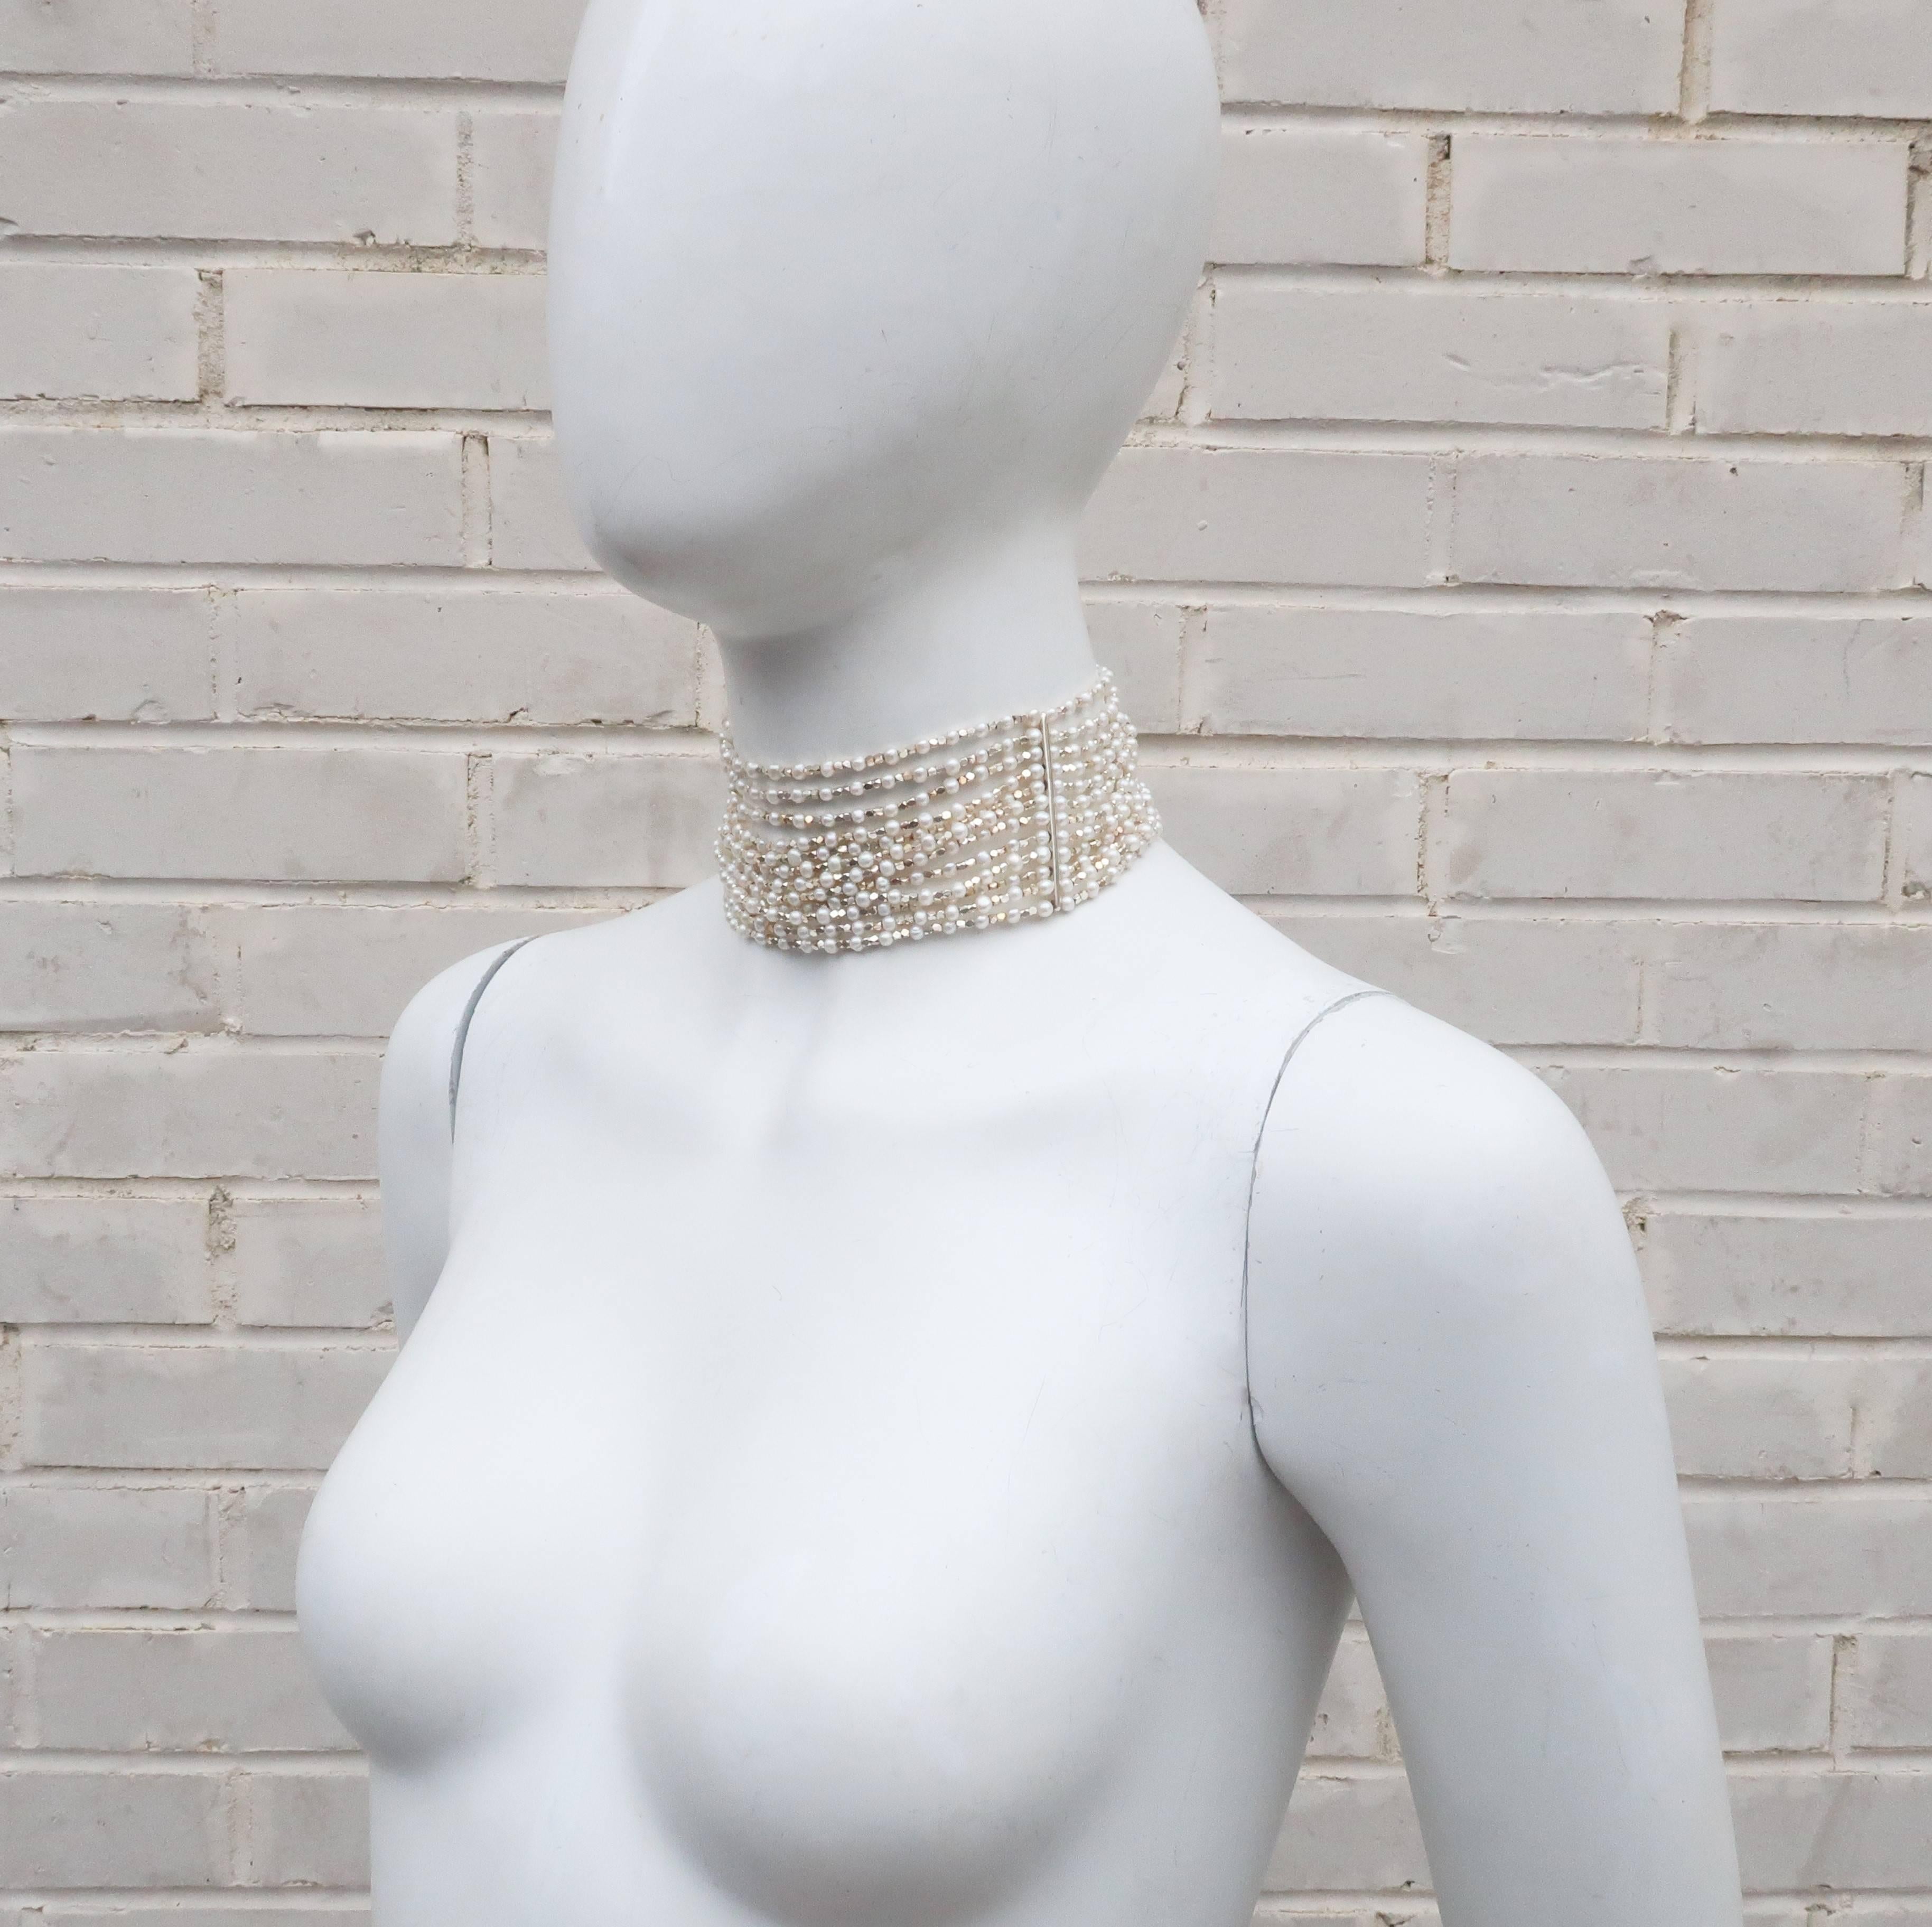 Carolee has been a trendsetting costume jewelry company since the 1970’s.  This 1980's choker style necklace has an opulent aesthetic with twelve strands of faceted sterling silver beads interspersed with faux pearls suspended by sterling silver